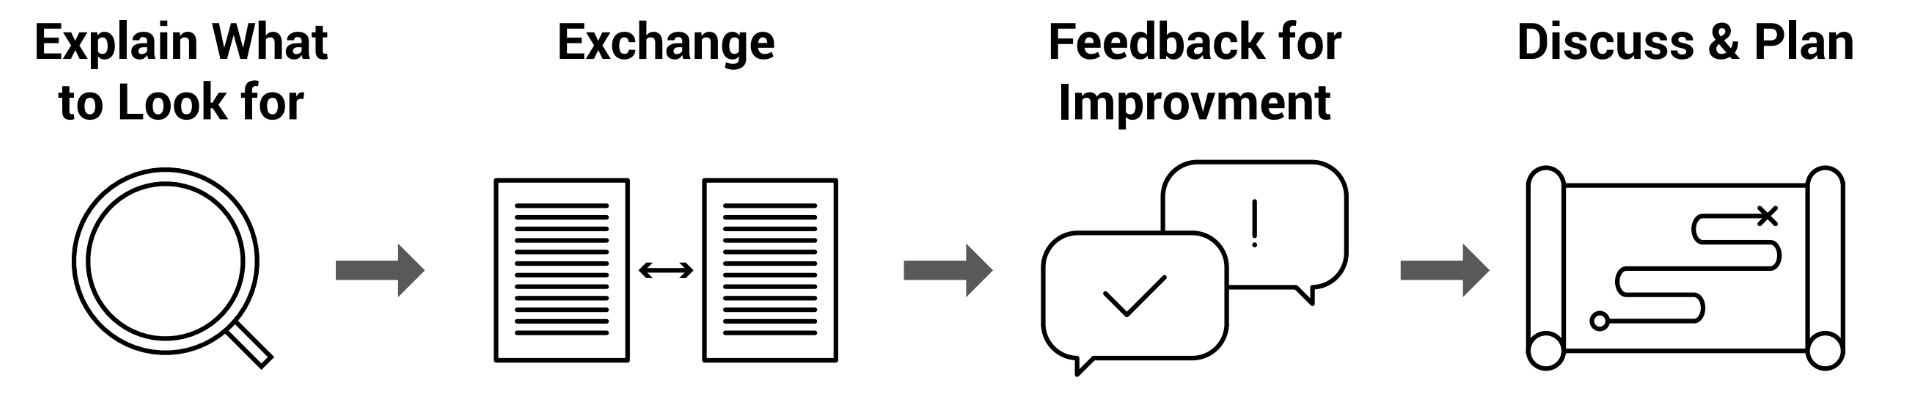 The steps in peer review are to first explain what to look for, then exchange works, next get feedback for improvement, and finally discuss and plan.